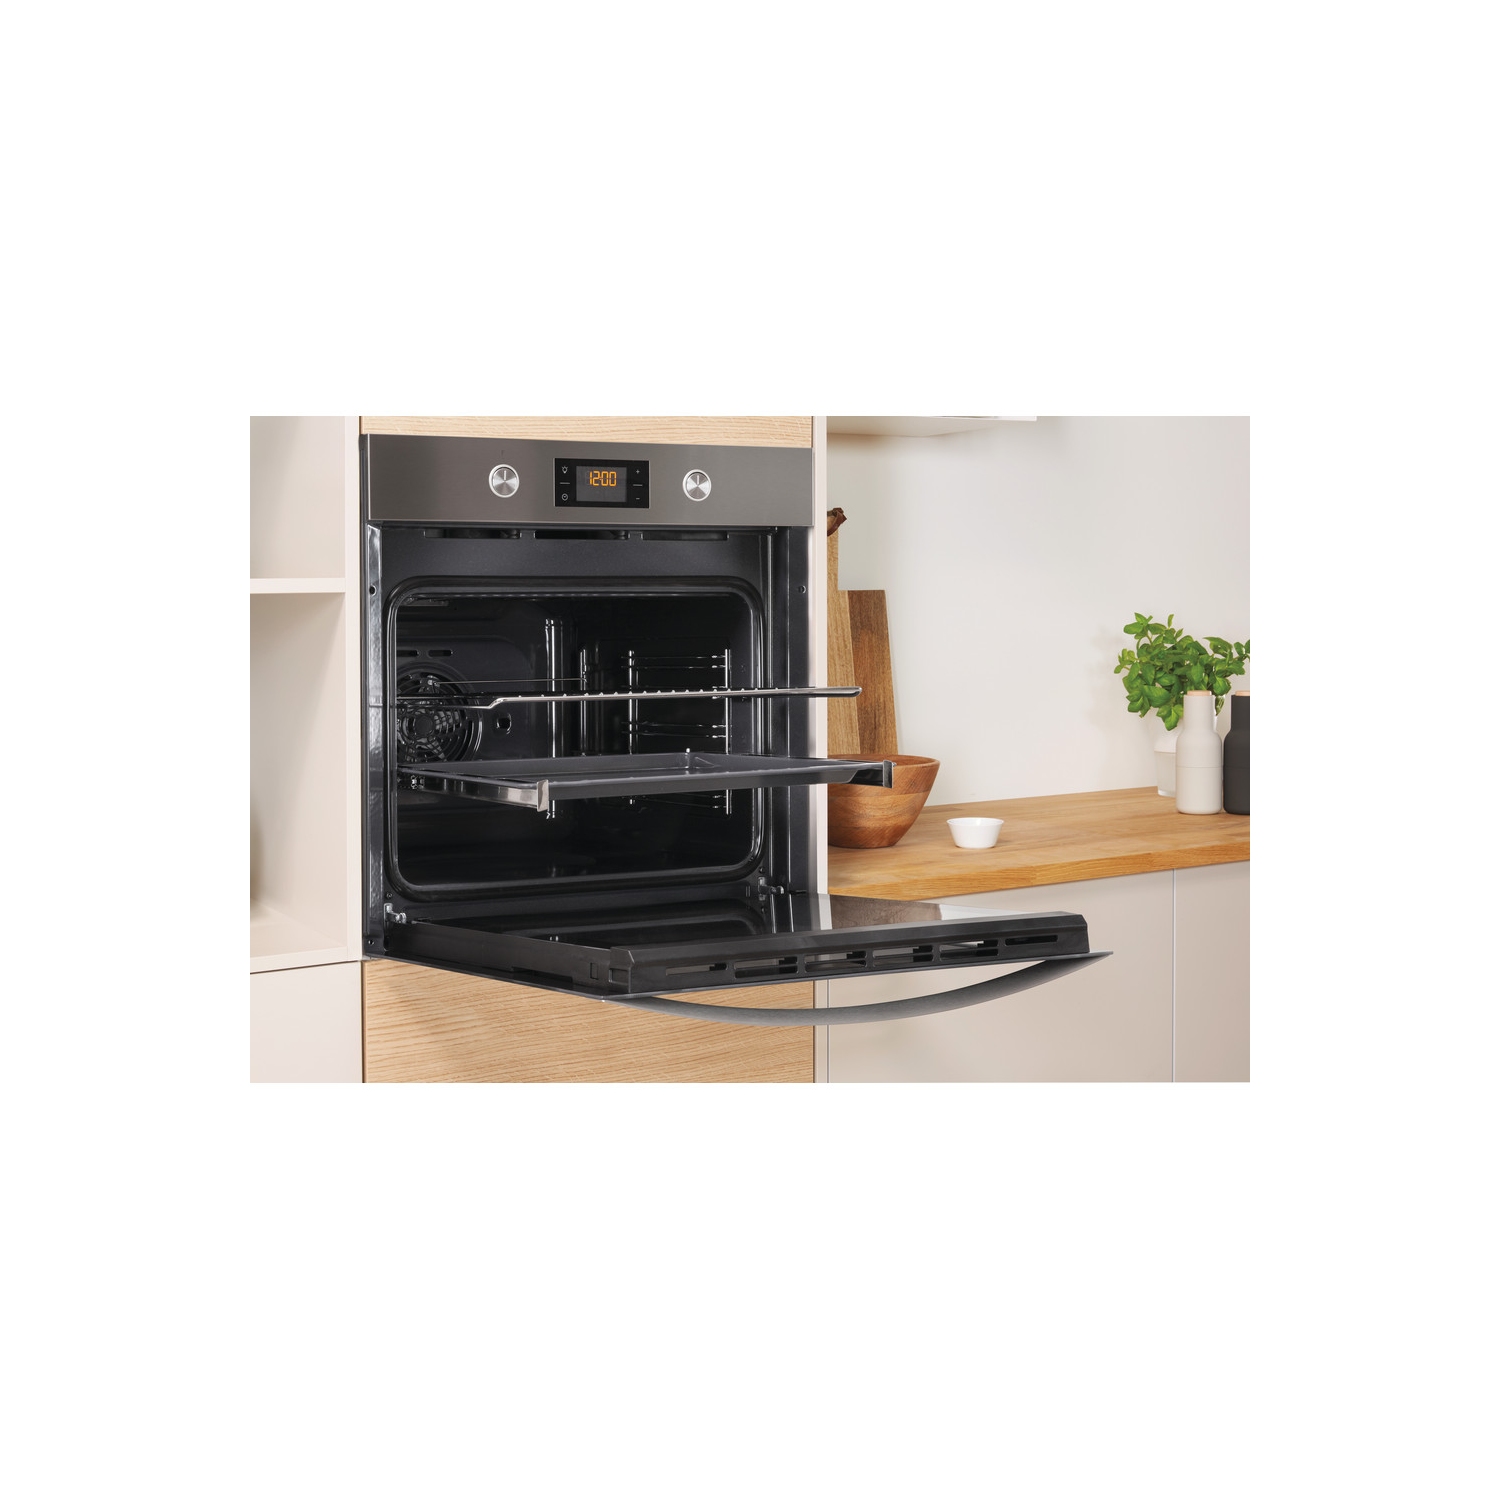 Indesit Built In Electric Single Oven - Stainless Steel - A+ Rated - 10